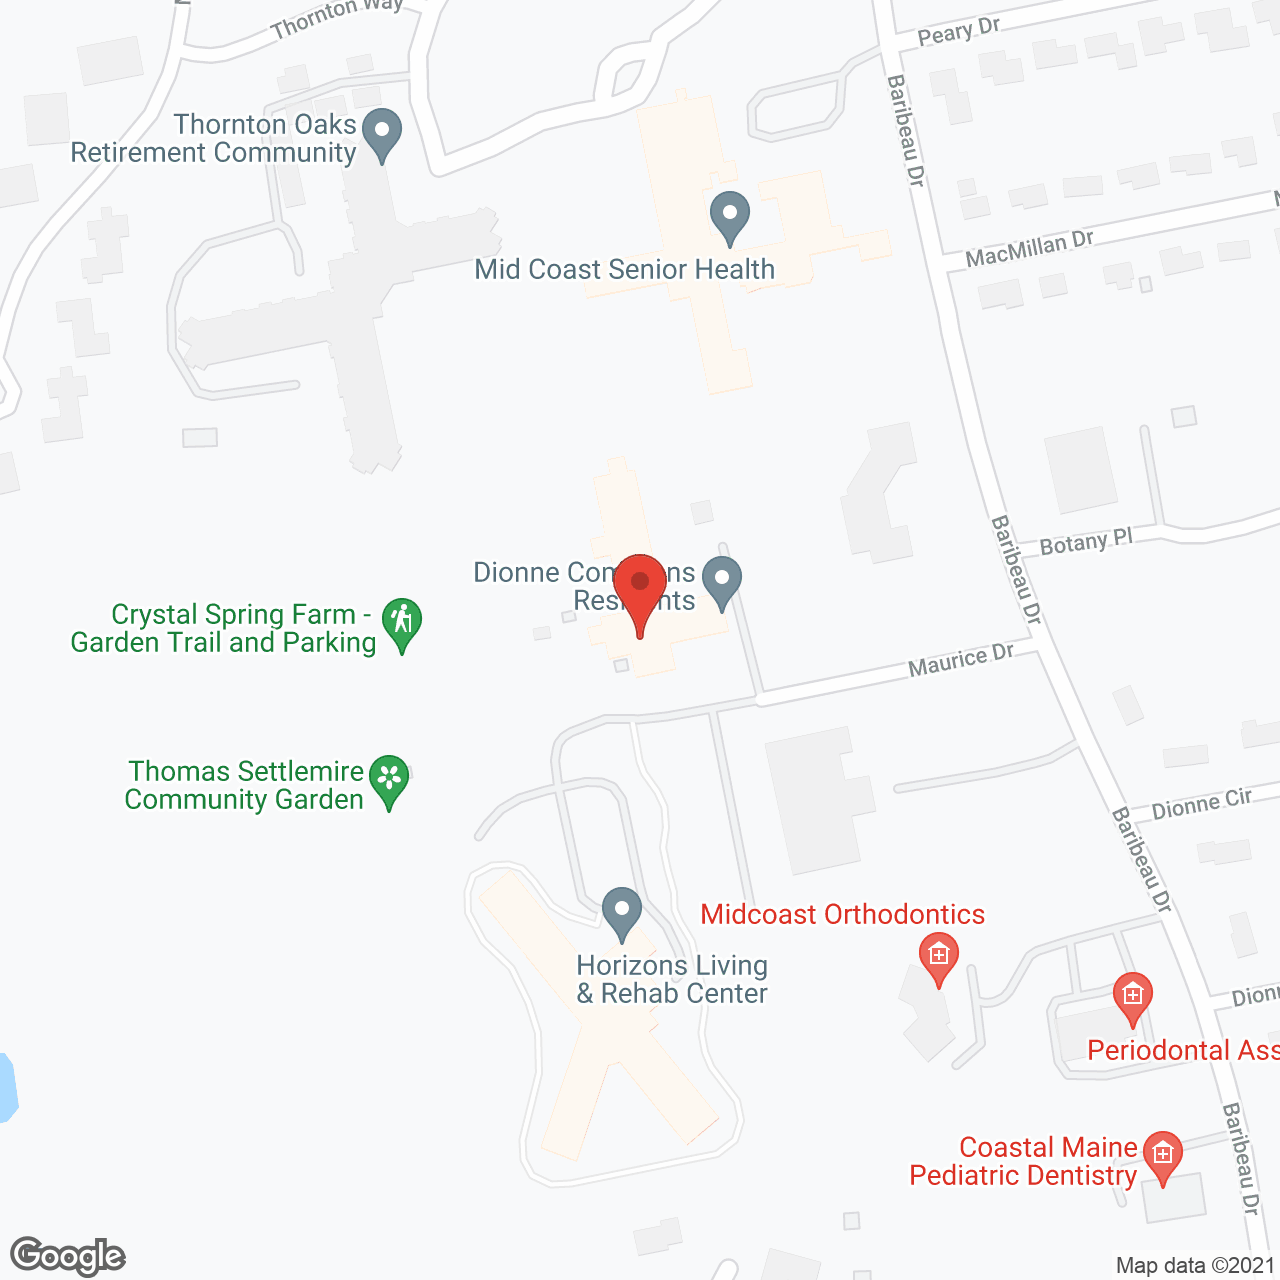 Dionne Commons in google map